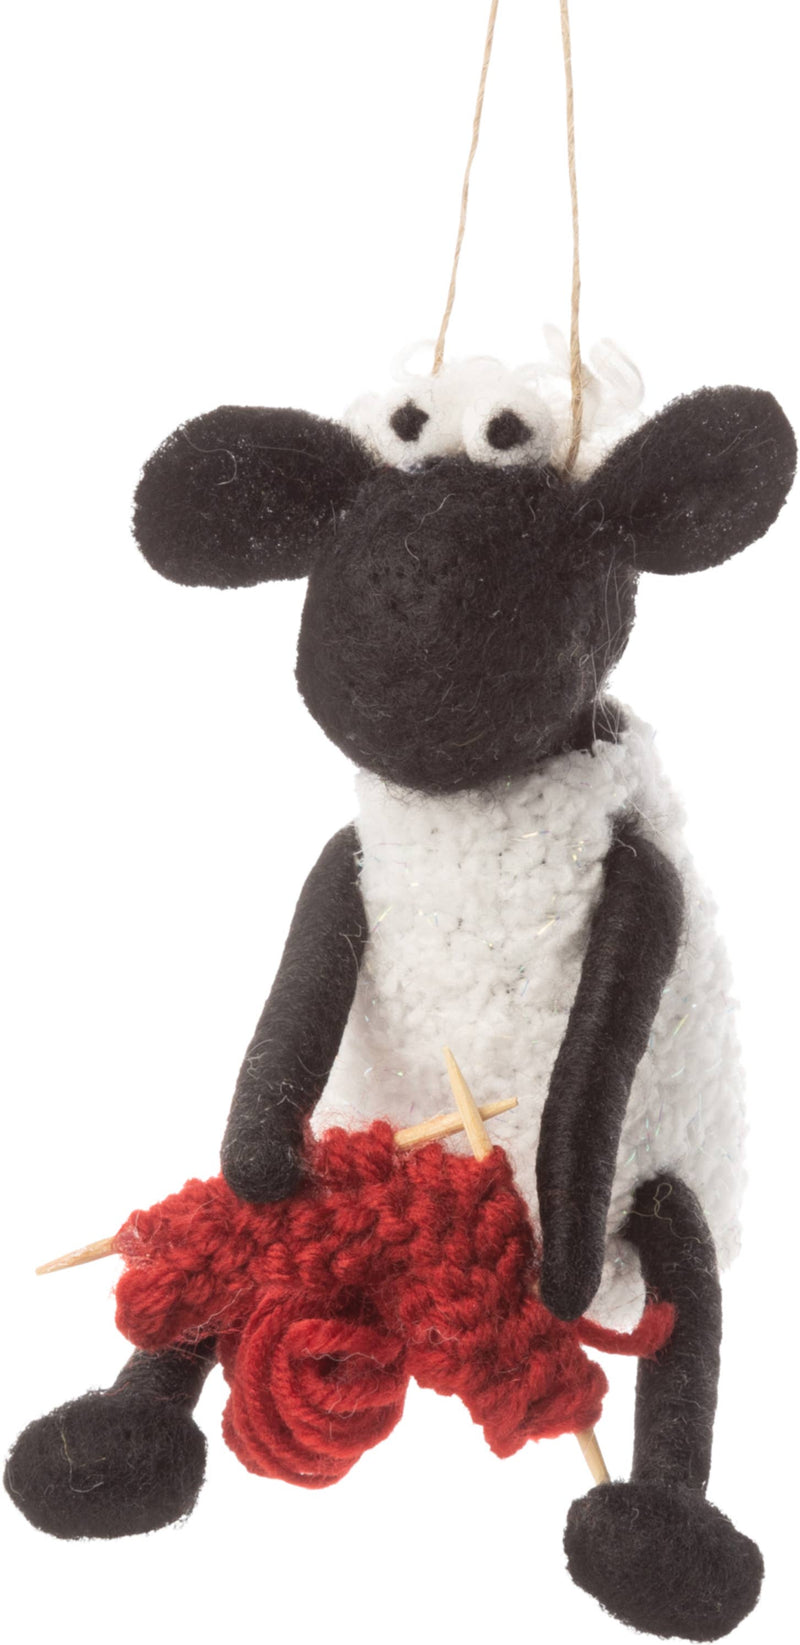 Sheep knitting ornament,4in